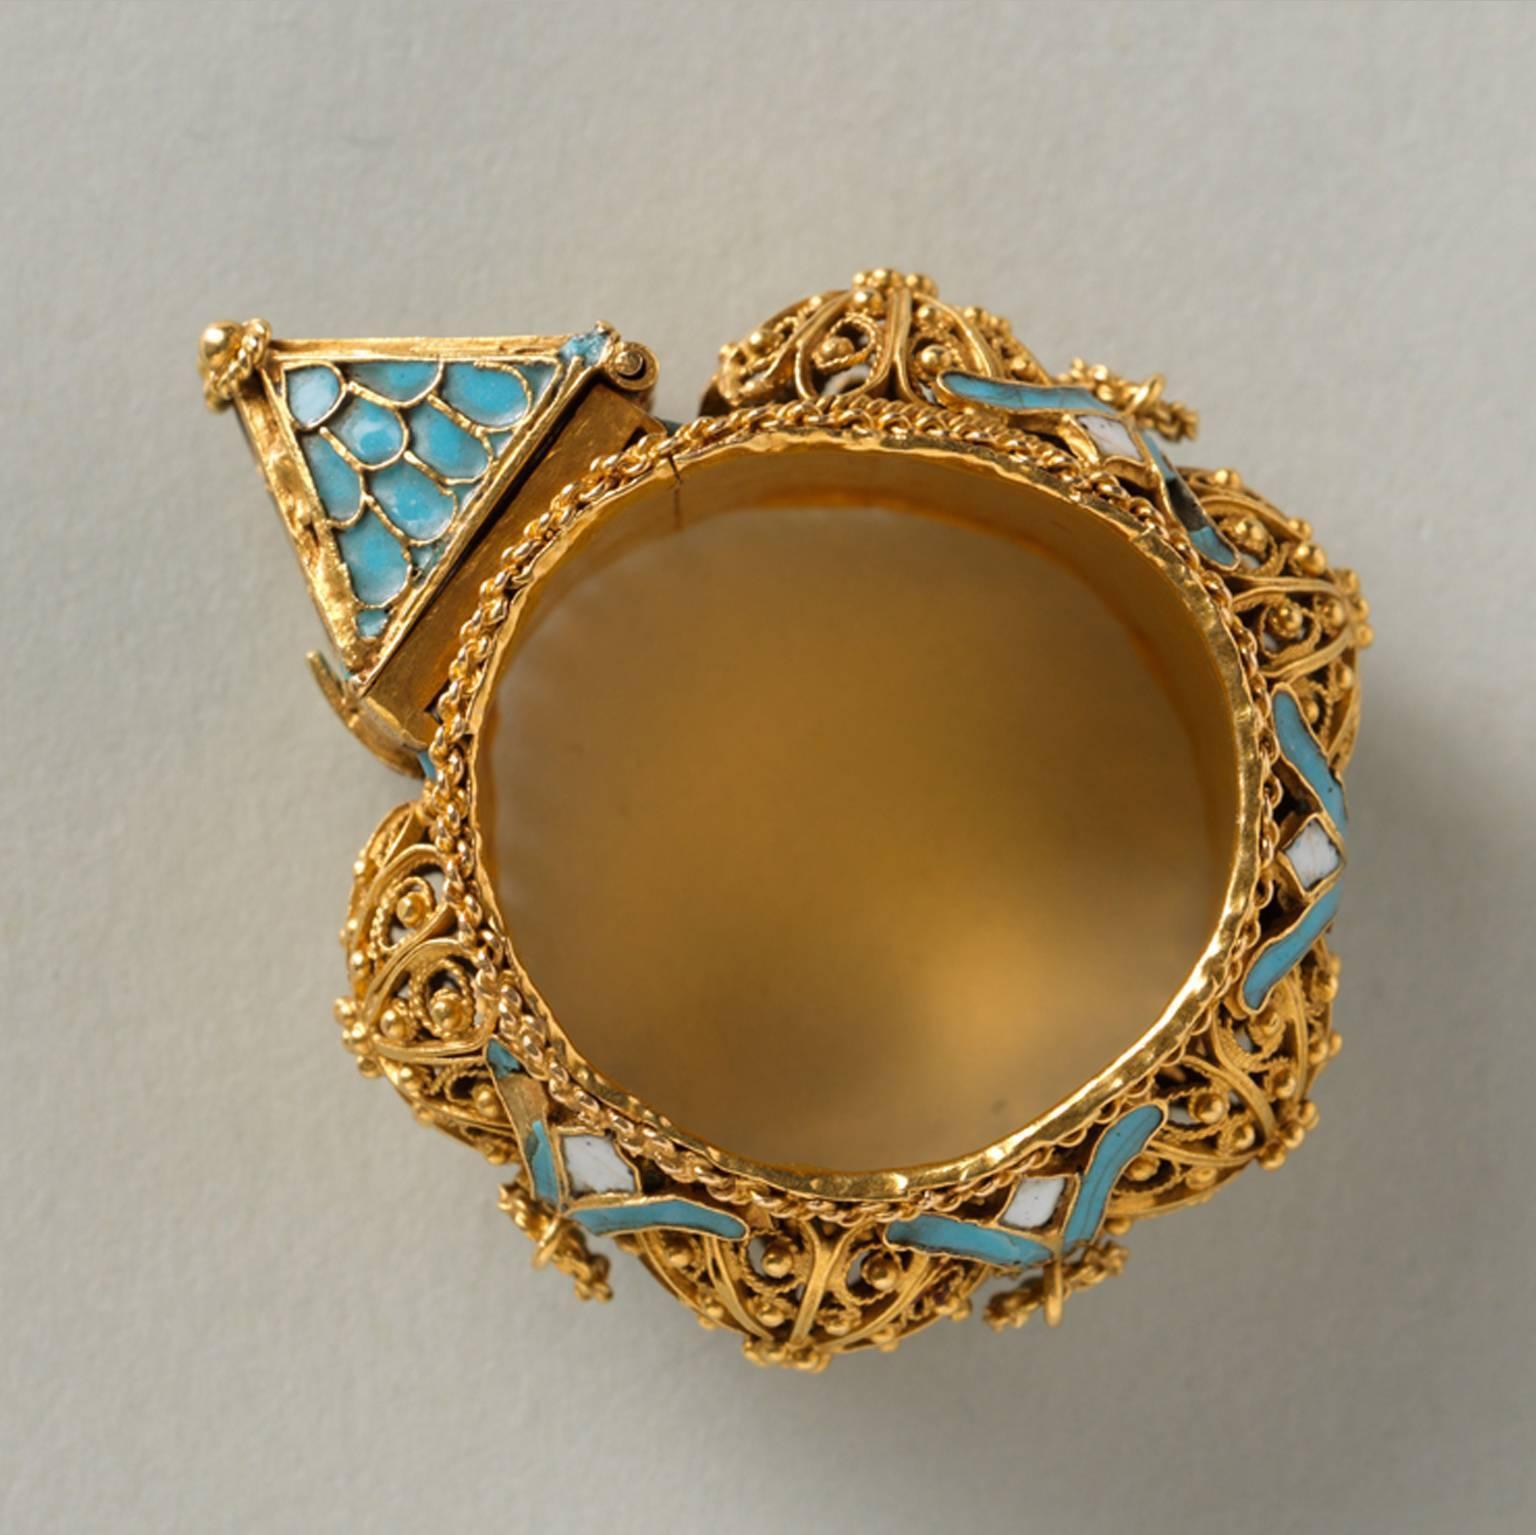 An important Jewish-marriage ring; hoop large and broad gold band, with filigree bosses enriched with little flowers in between, on which are loops of twisted gold wire (one is missing); twisted wires along the edges and white and blue enamel; on